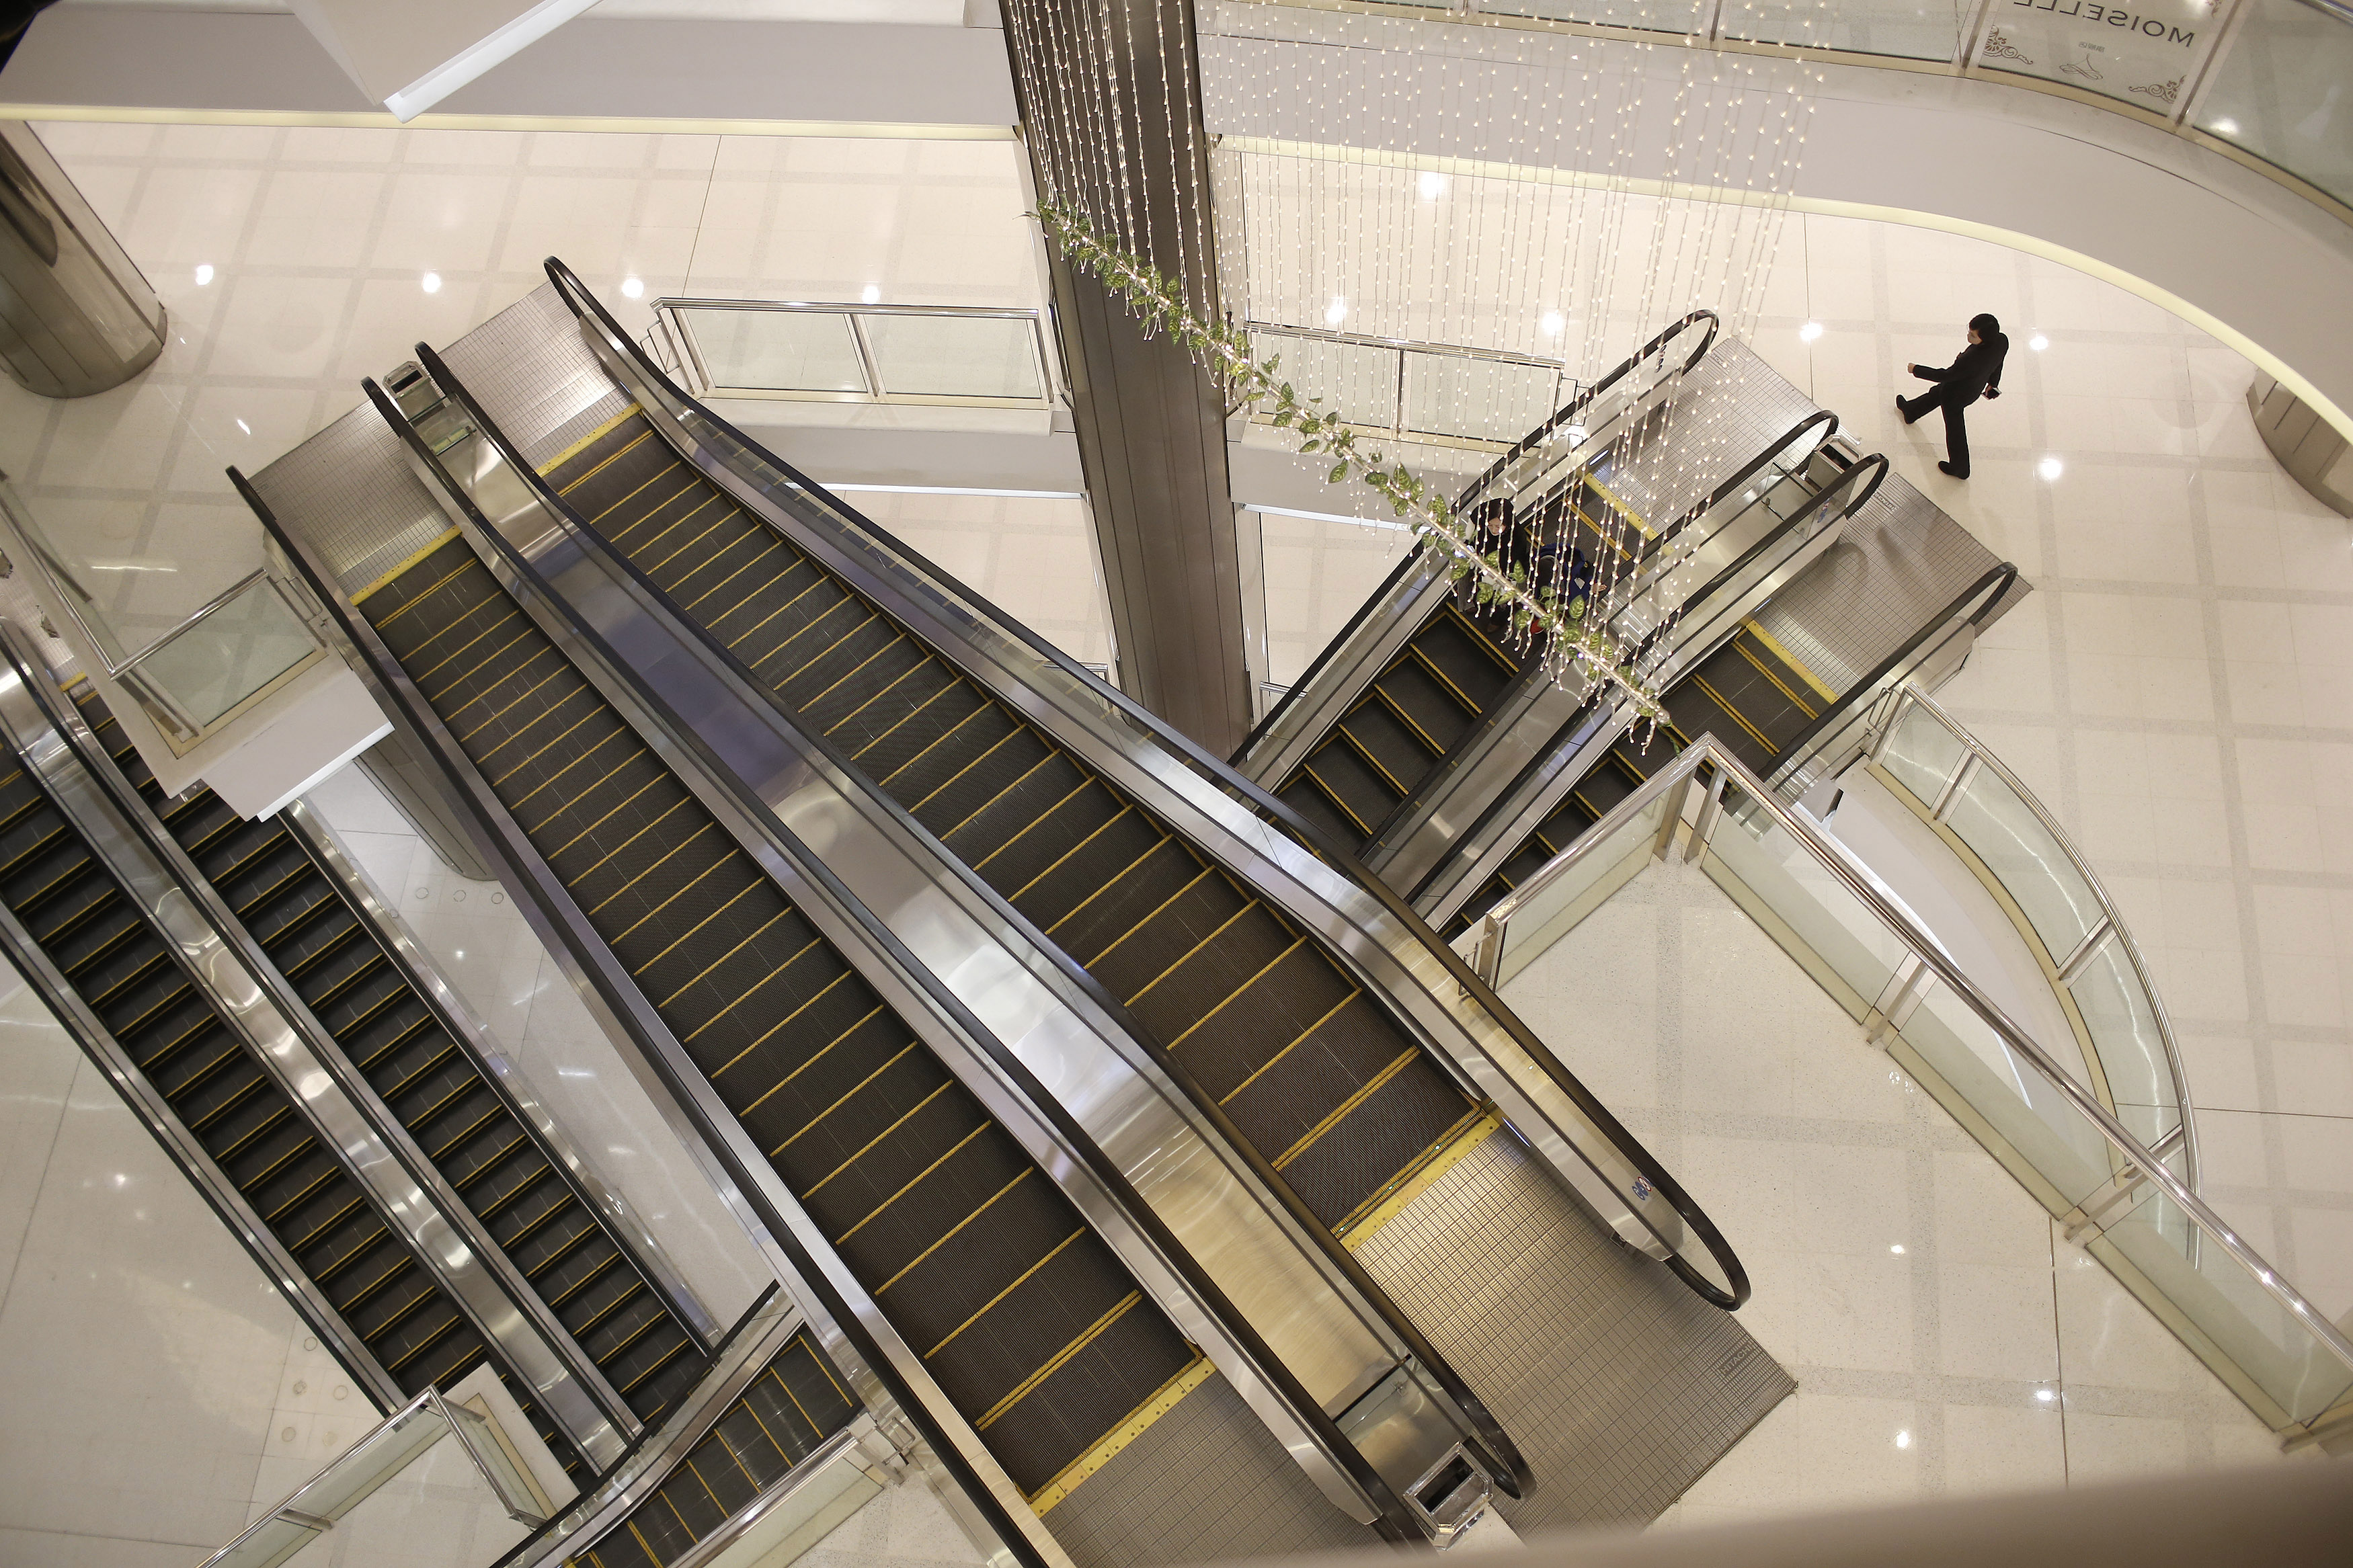 A woman walks next to escalators at a department store in Shanghai